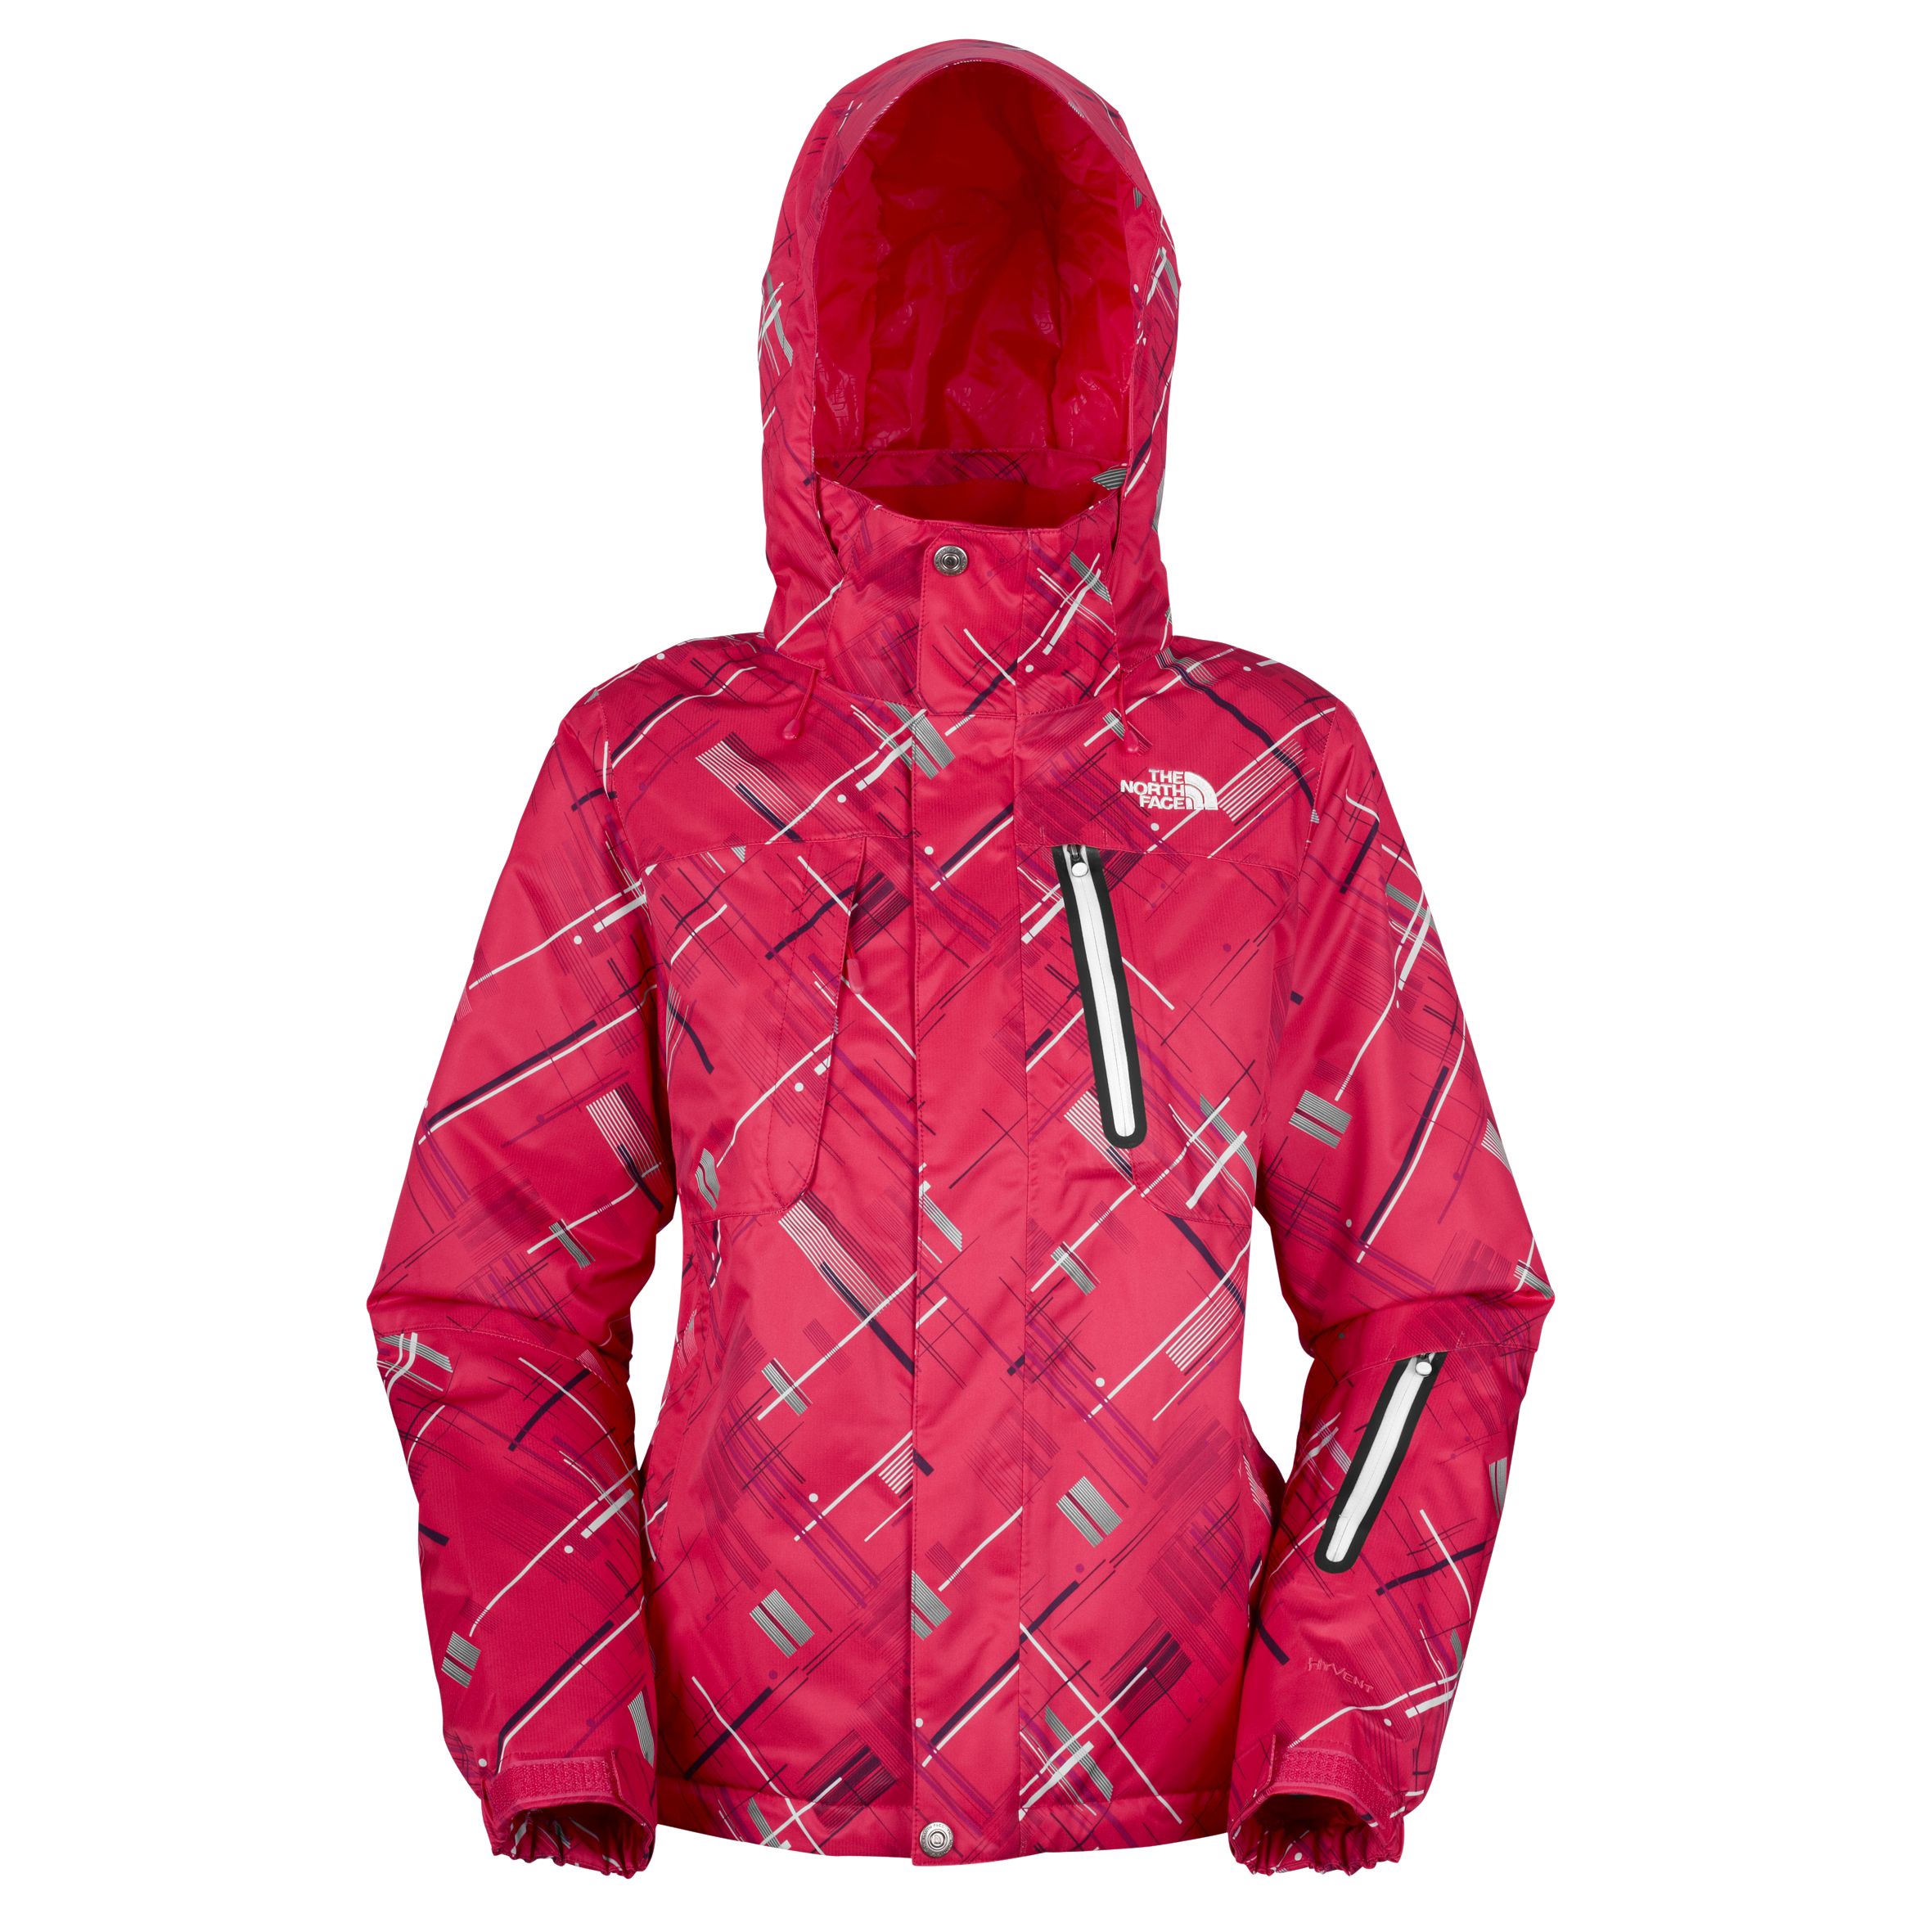 The North Face Scary Cherry Ski Jacket, Retro Pink at John Lewis